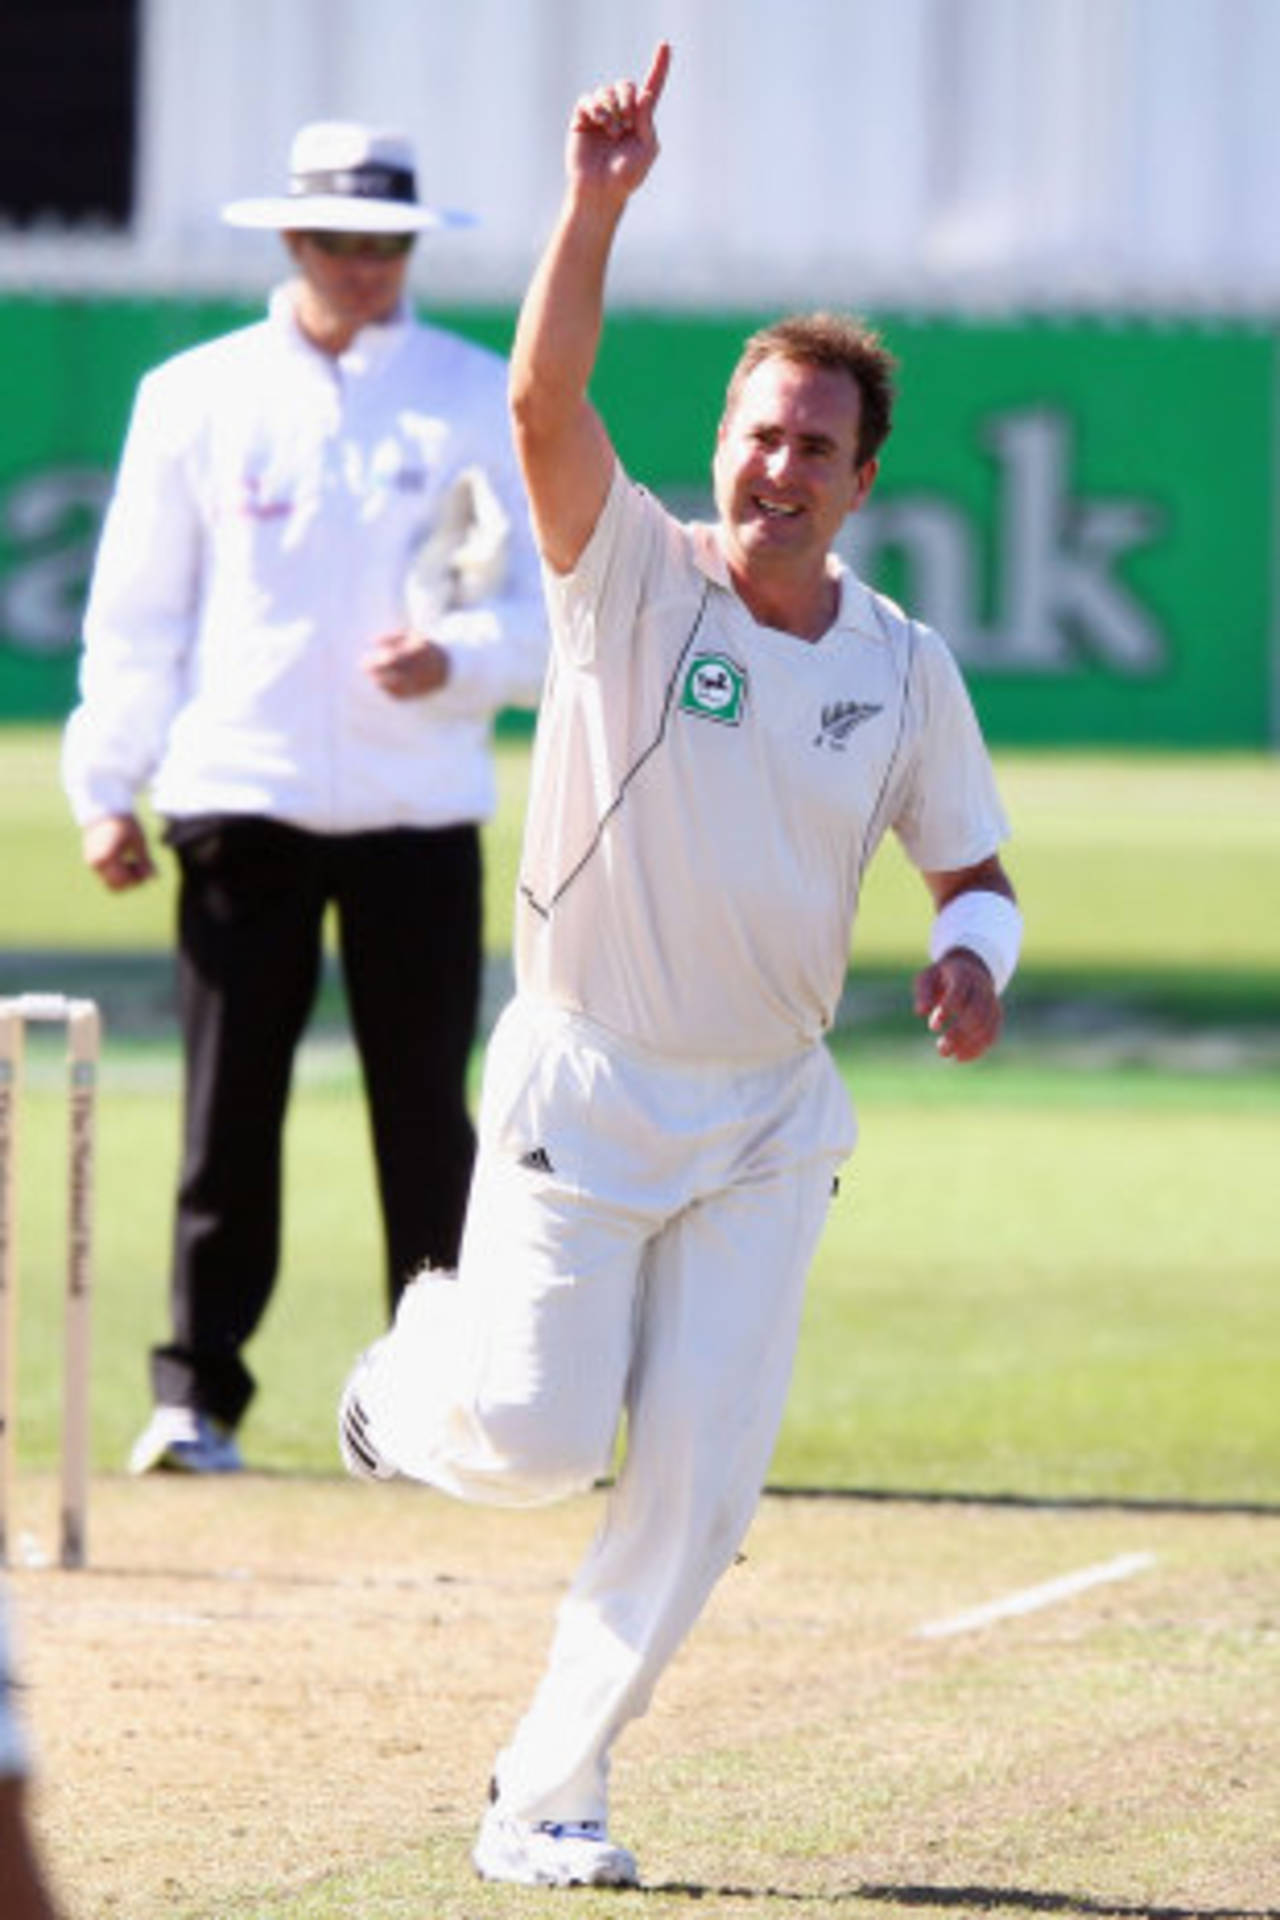 Mark Gillespie celebrates a wicket, New Zealand v South Africa, 2nd Test, Hamilton, 2nd day, March 16, 2012